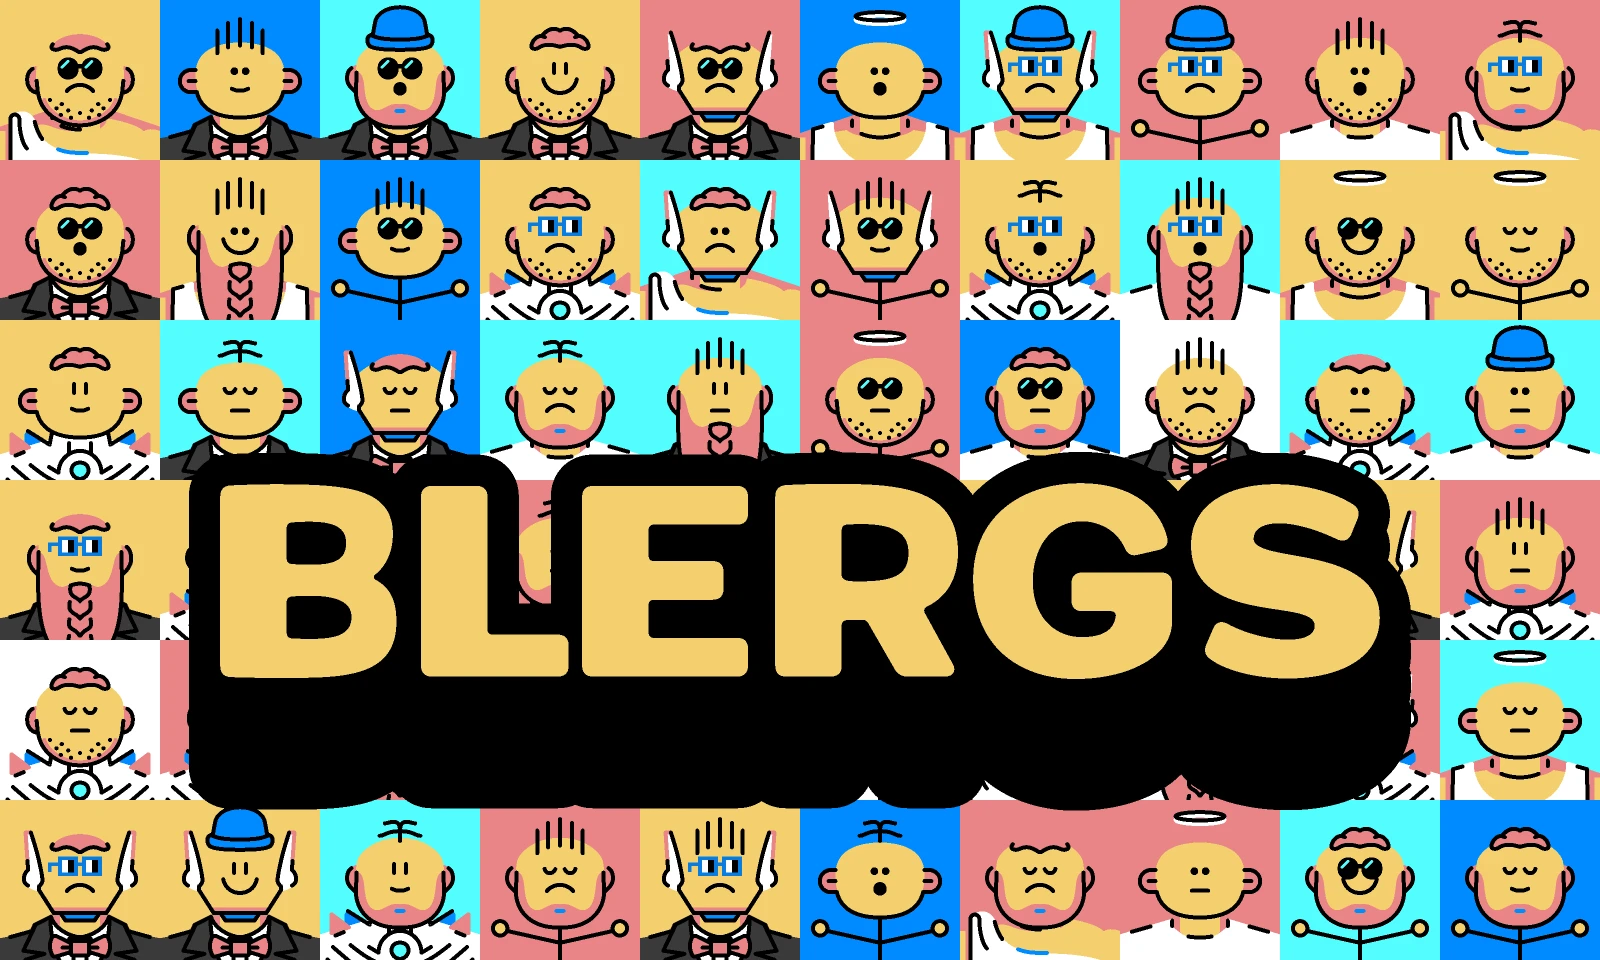 Blergs NFT Demo - December 2021 for Figma and Adobe XD